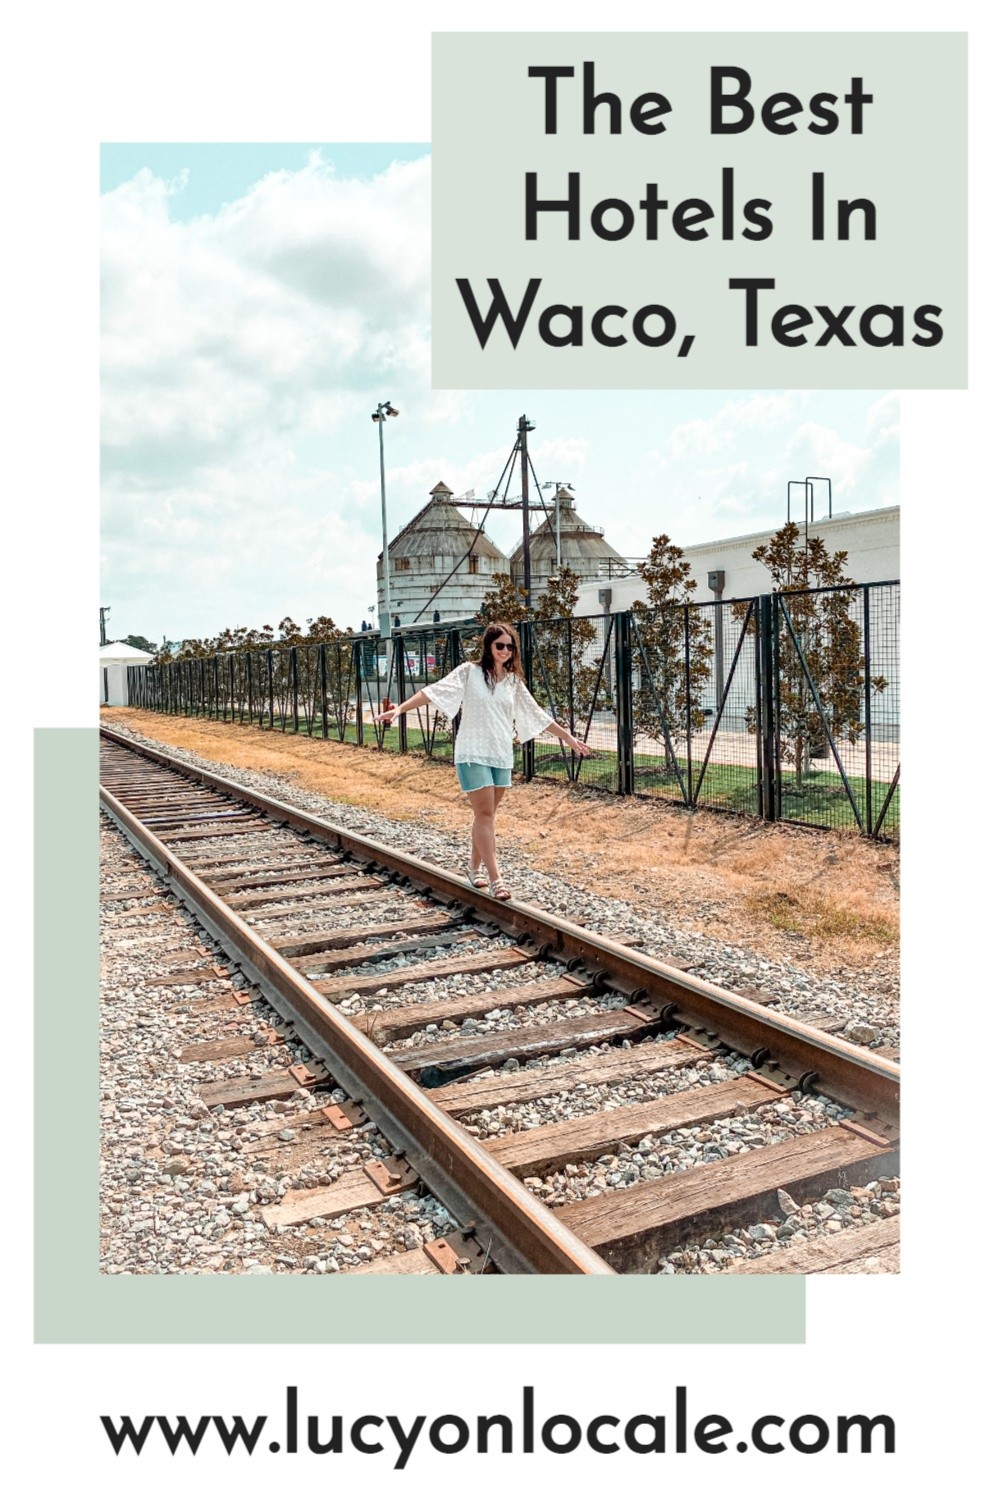 The best hotels in Waco